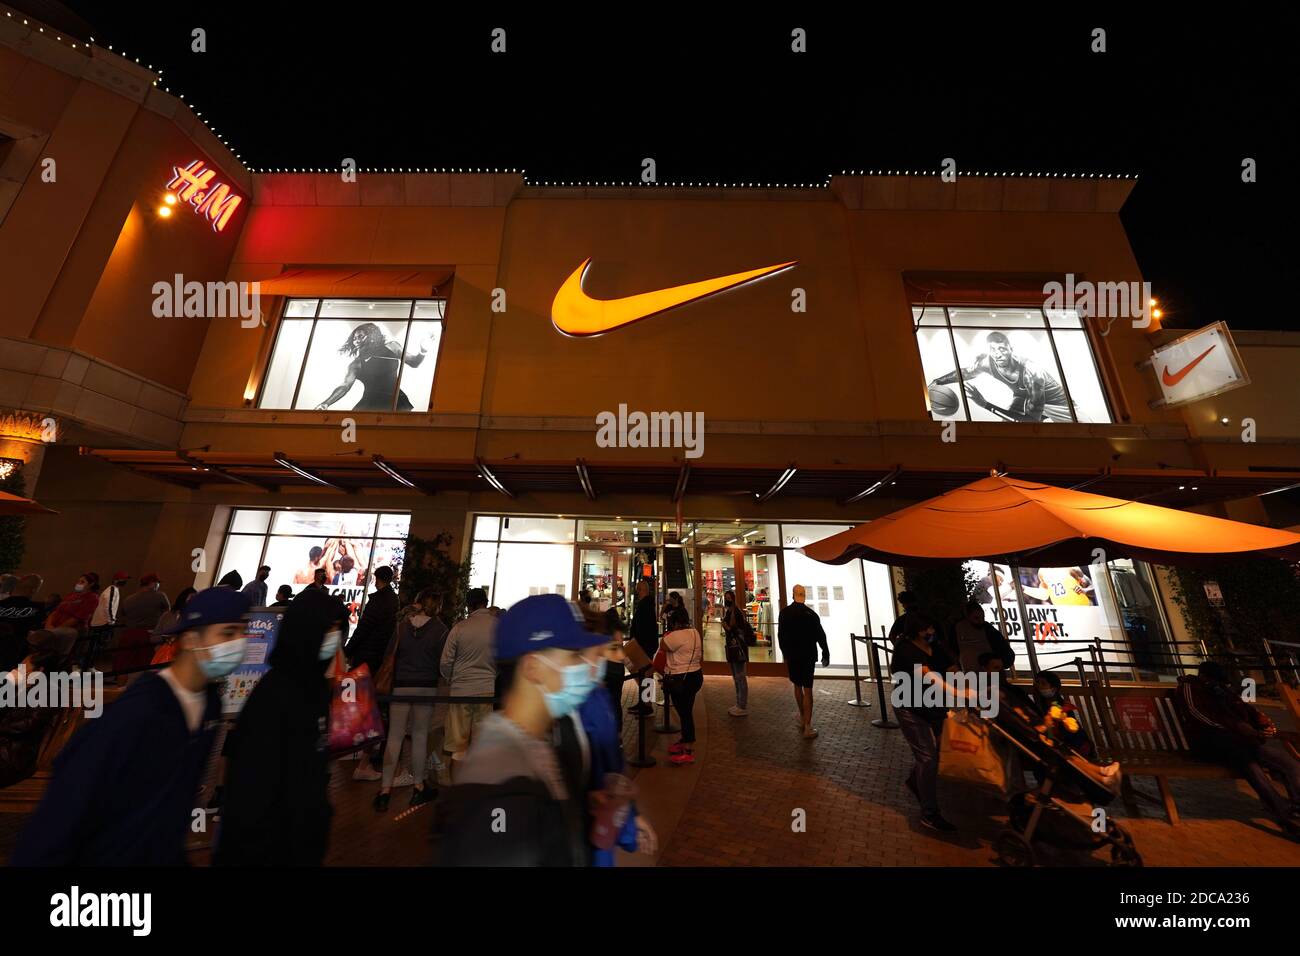 Los Angeles, United States. 17th Nov, 2020. Shoppers walk past the Nike  Factory Outlet store at the Citadel Outlets, Tuesday, Nov. 17, 2020, in Los  Angeles. Photo via Credit: Newscom/Alamy Live News